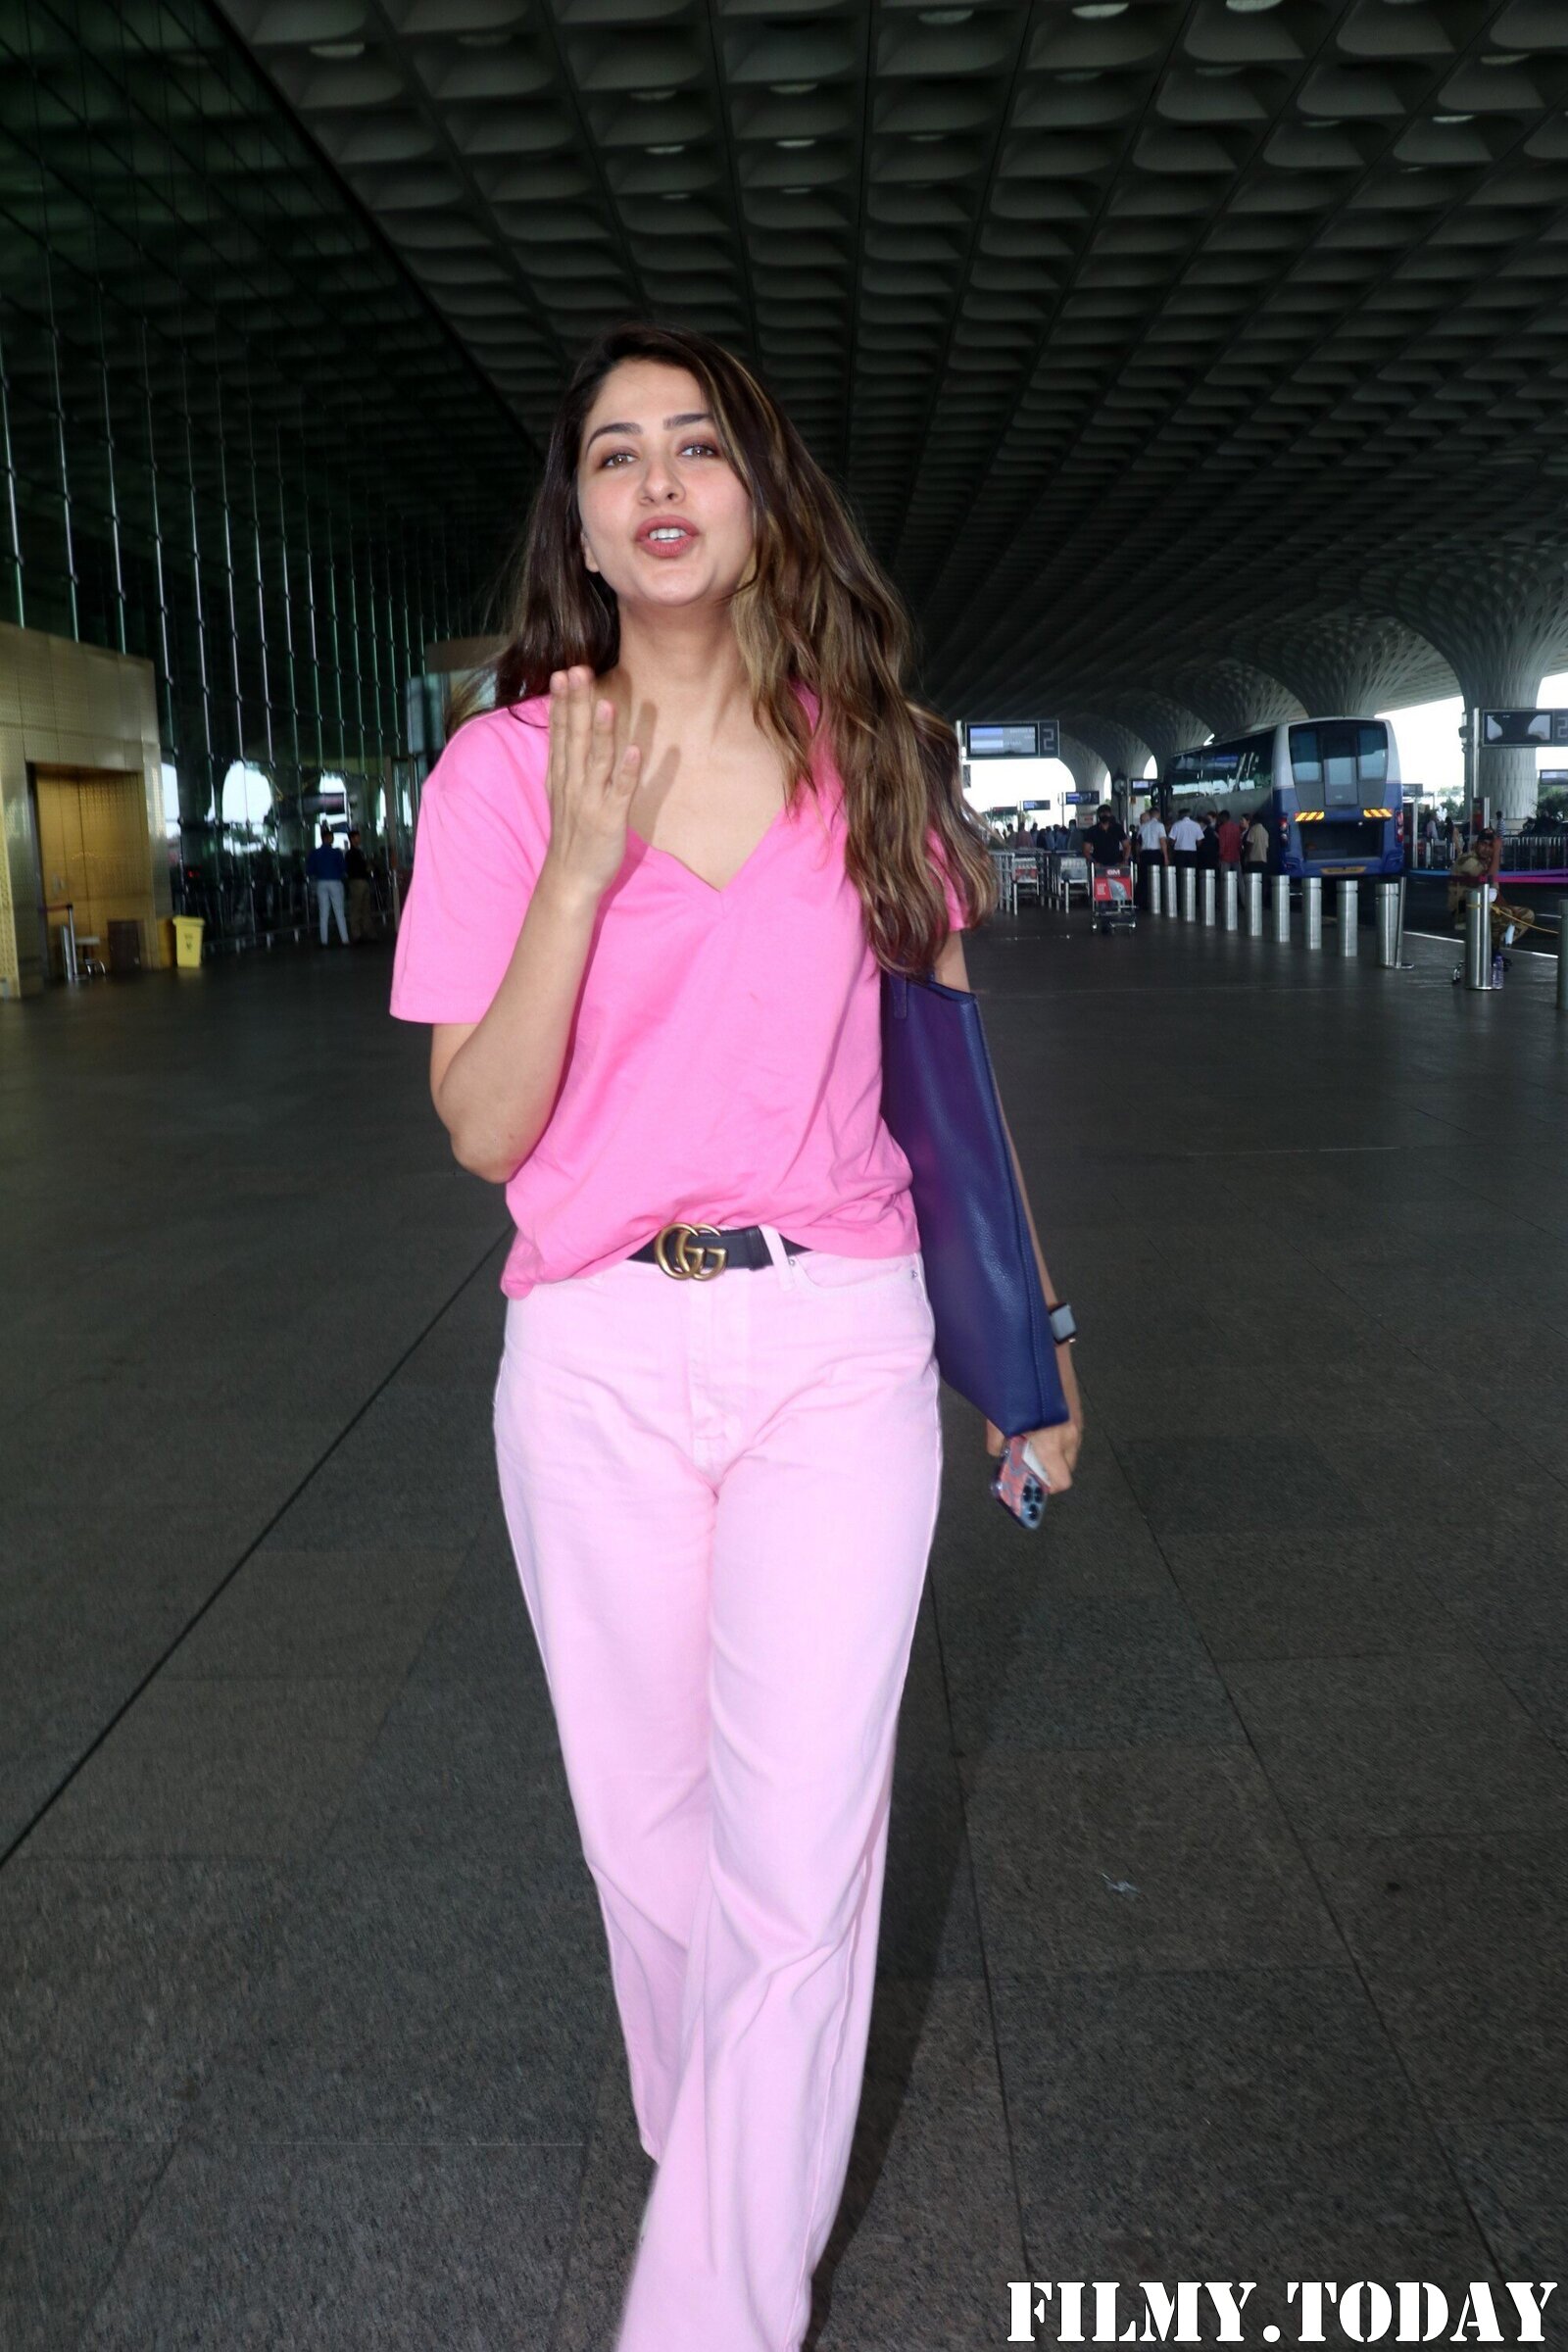 Malvika Raaj - Photos: Celebs Spotted At Airport | Picture 1880721